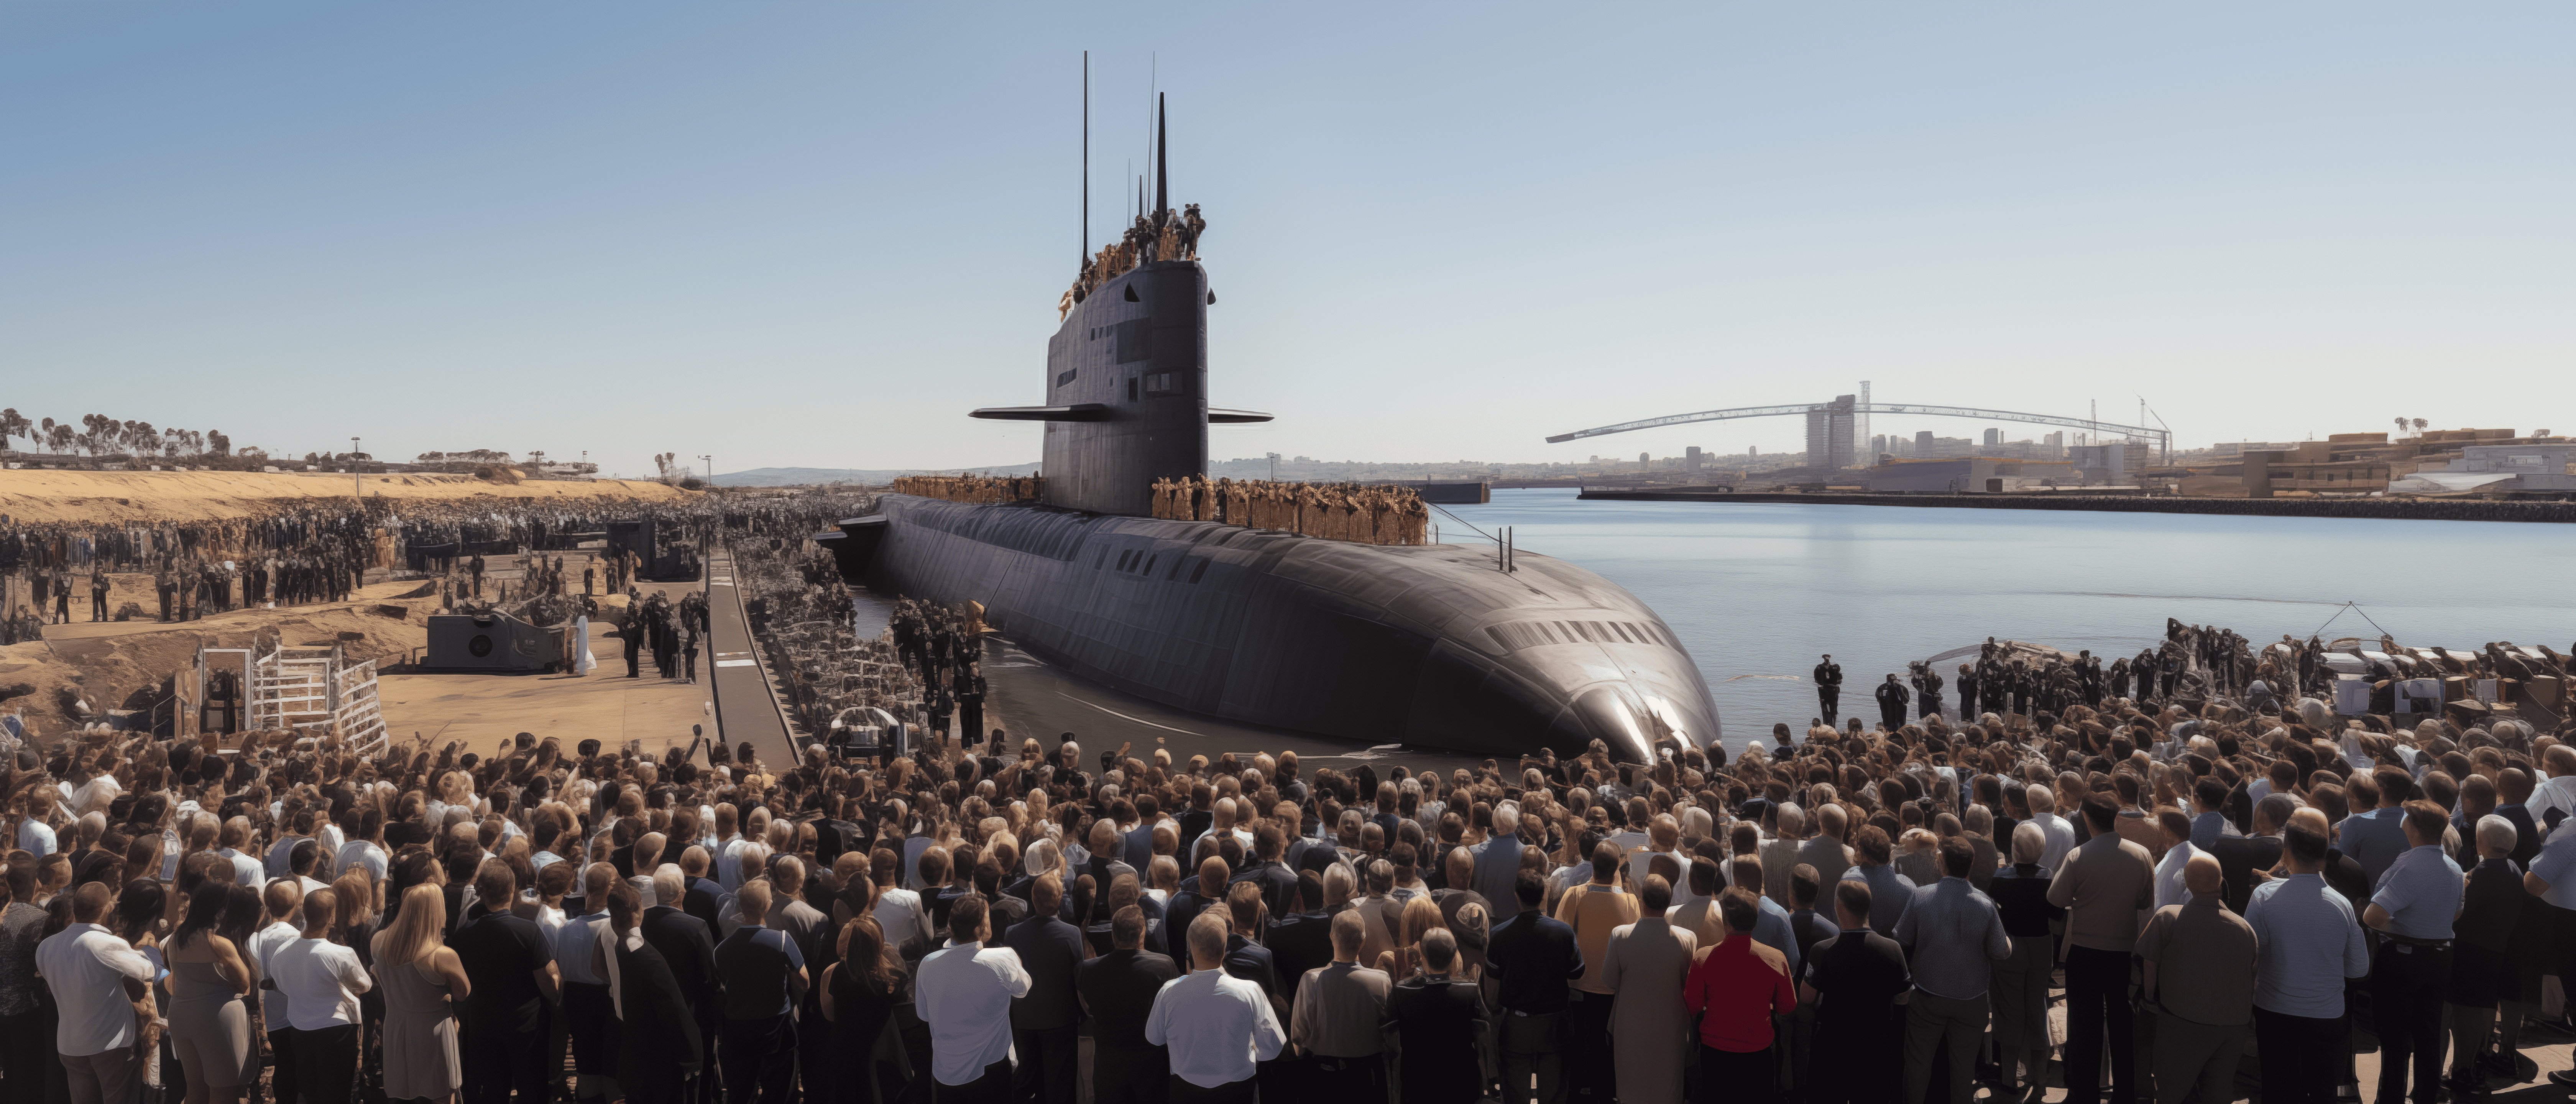 uncoy._Wide_shot_of_a_nuclear_submarine_coming_into_dock_in_aus_773c56d8-17bc-4d09-9bbc-f2a94d5ad96d.png